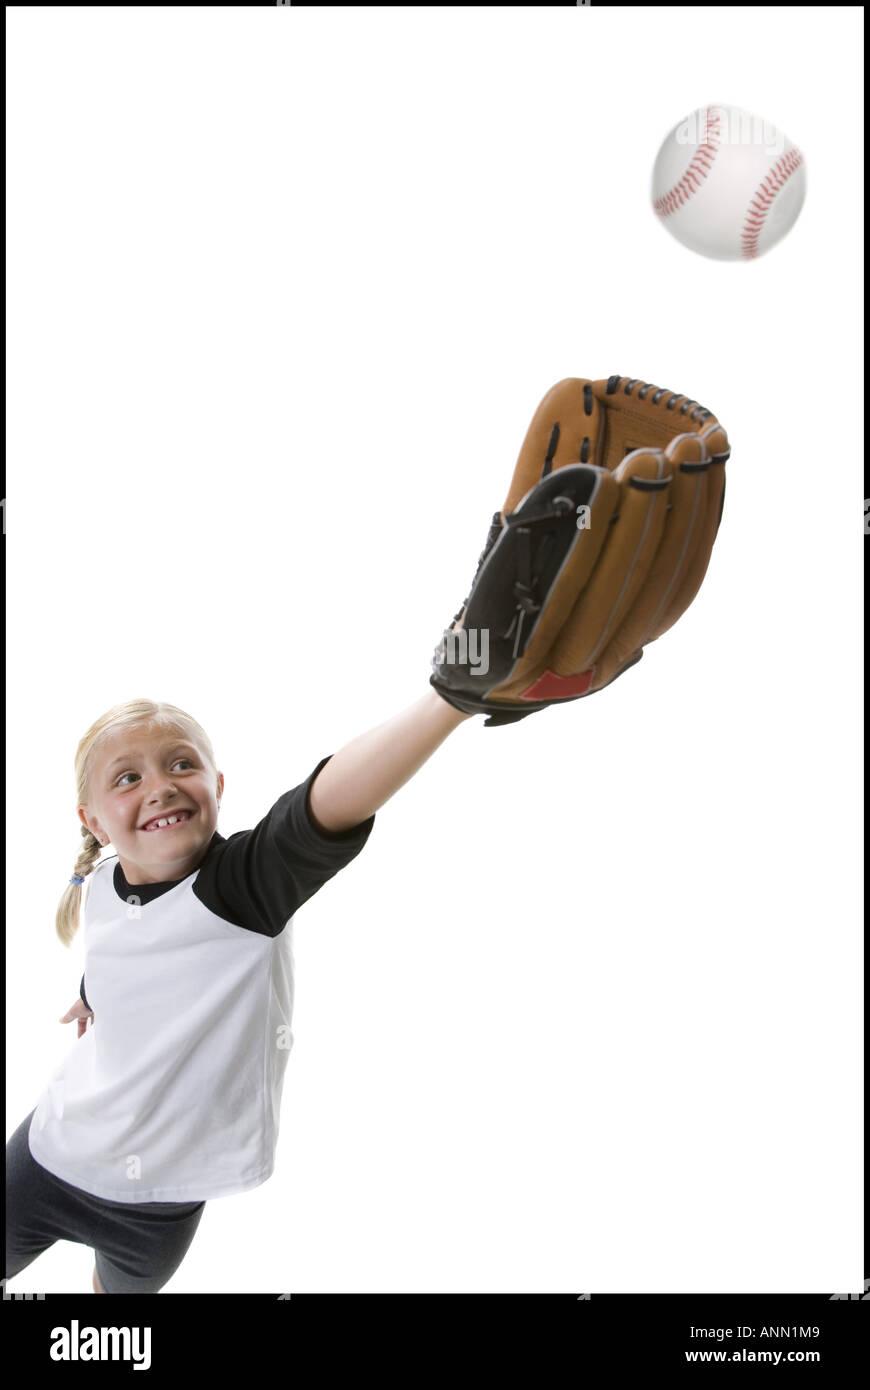 Low angle view of a girl catching a baseball Stock Photo - Alamy